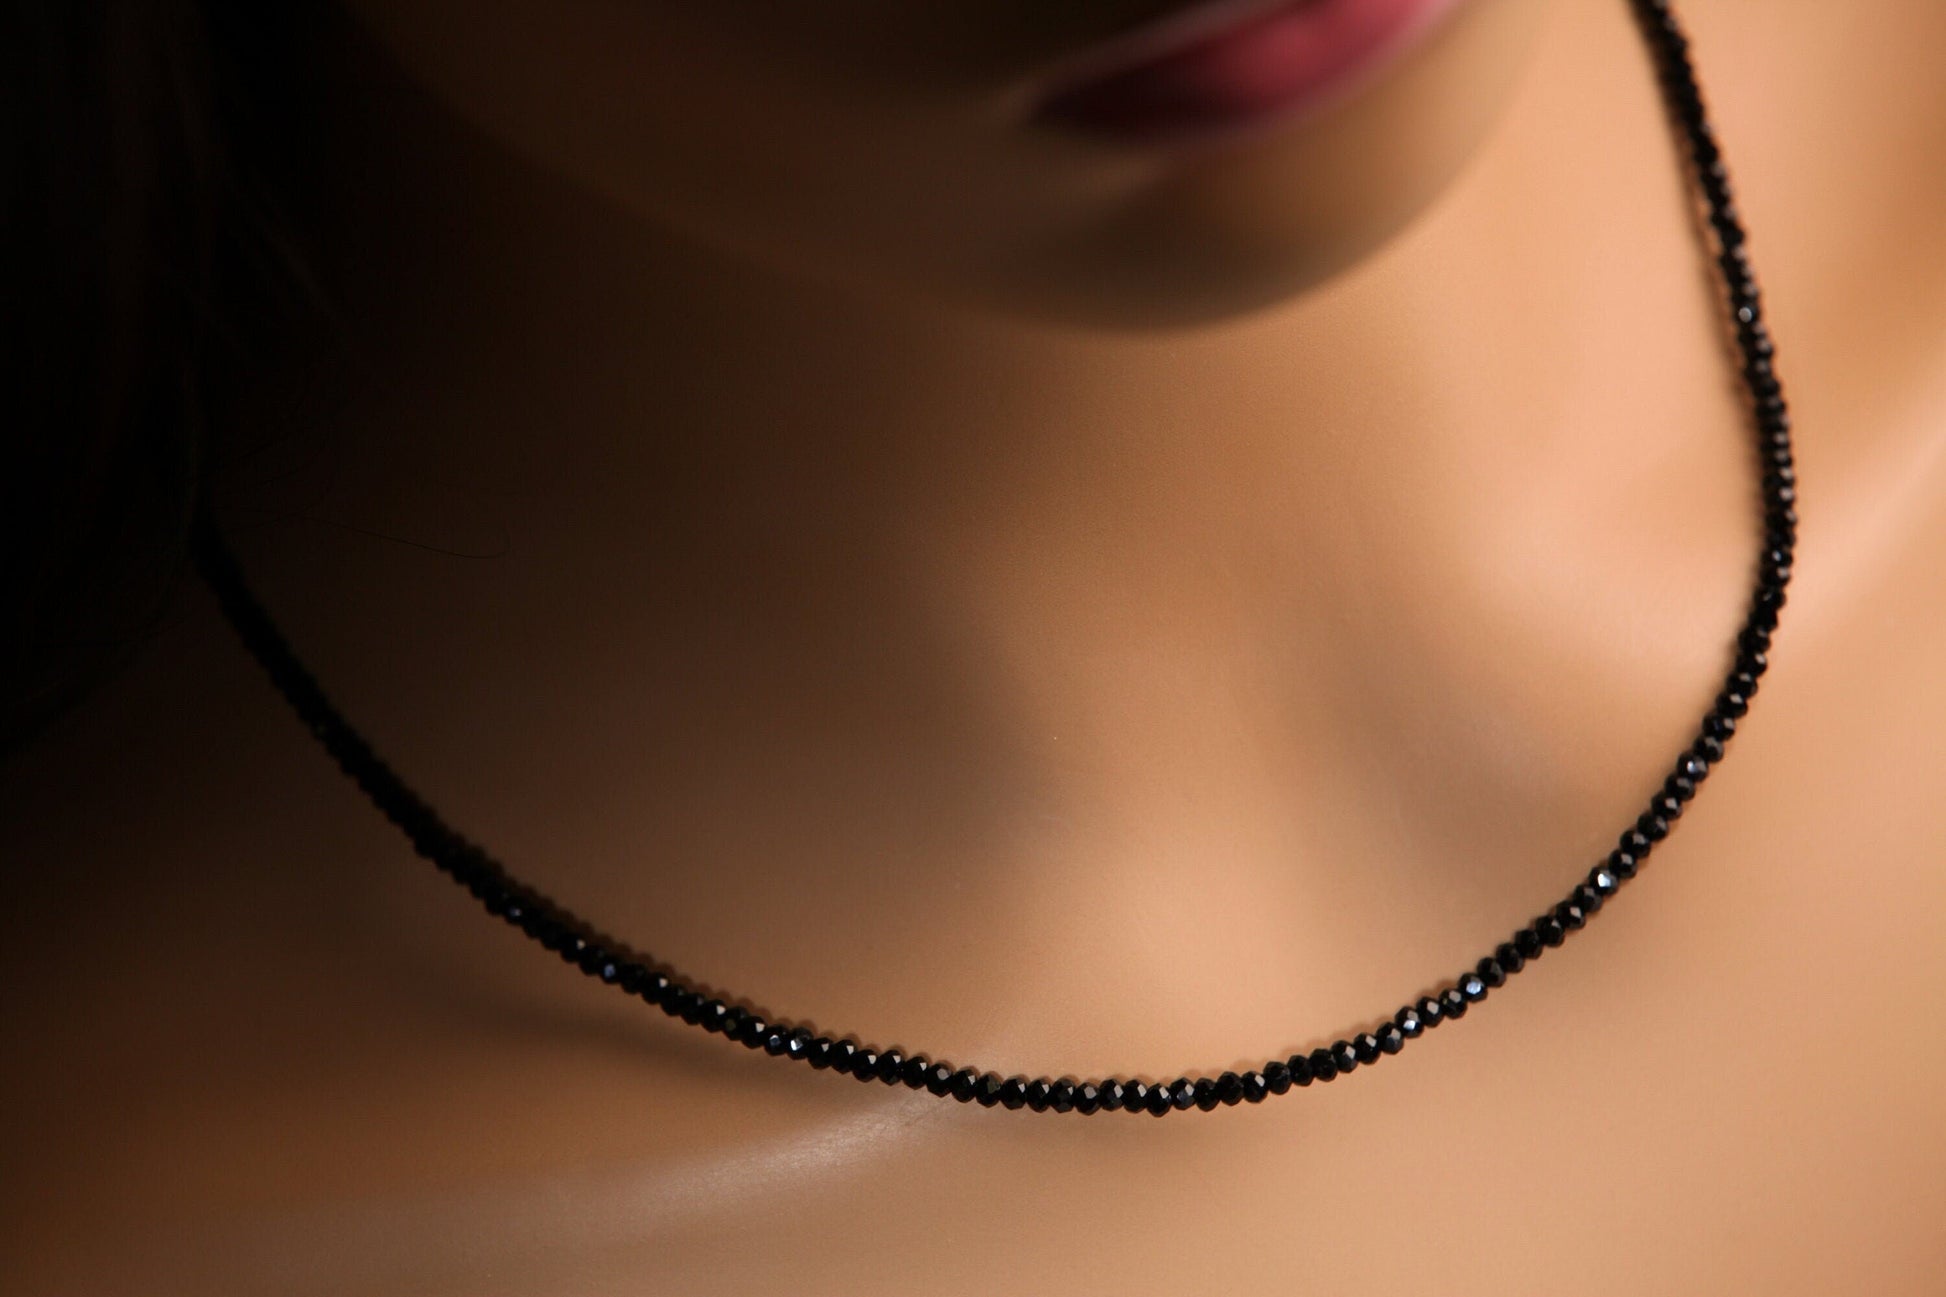 Natural Black Spinel Micro Faceted 3mm Diamond Cut 925 Sterling Silver Choker Layering Necklace Minimalist, Layering Necklace 14&quot; to 40&quot;